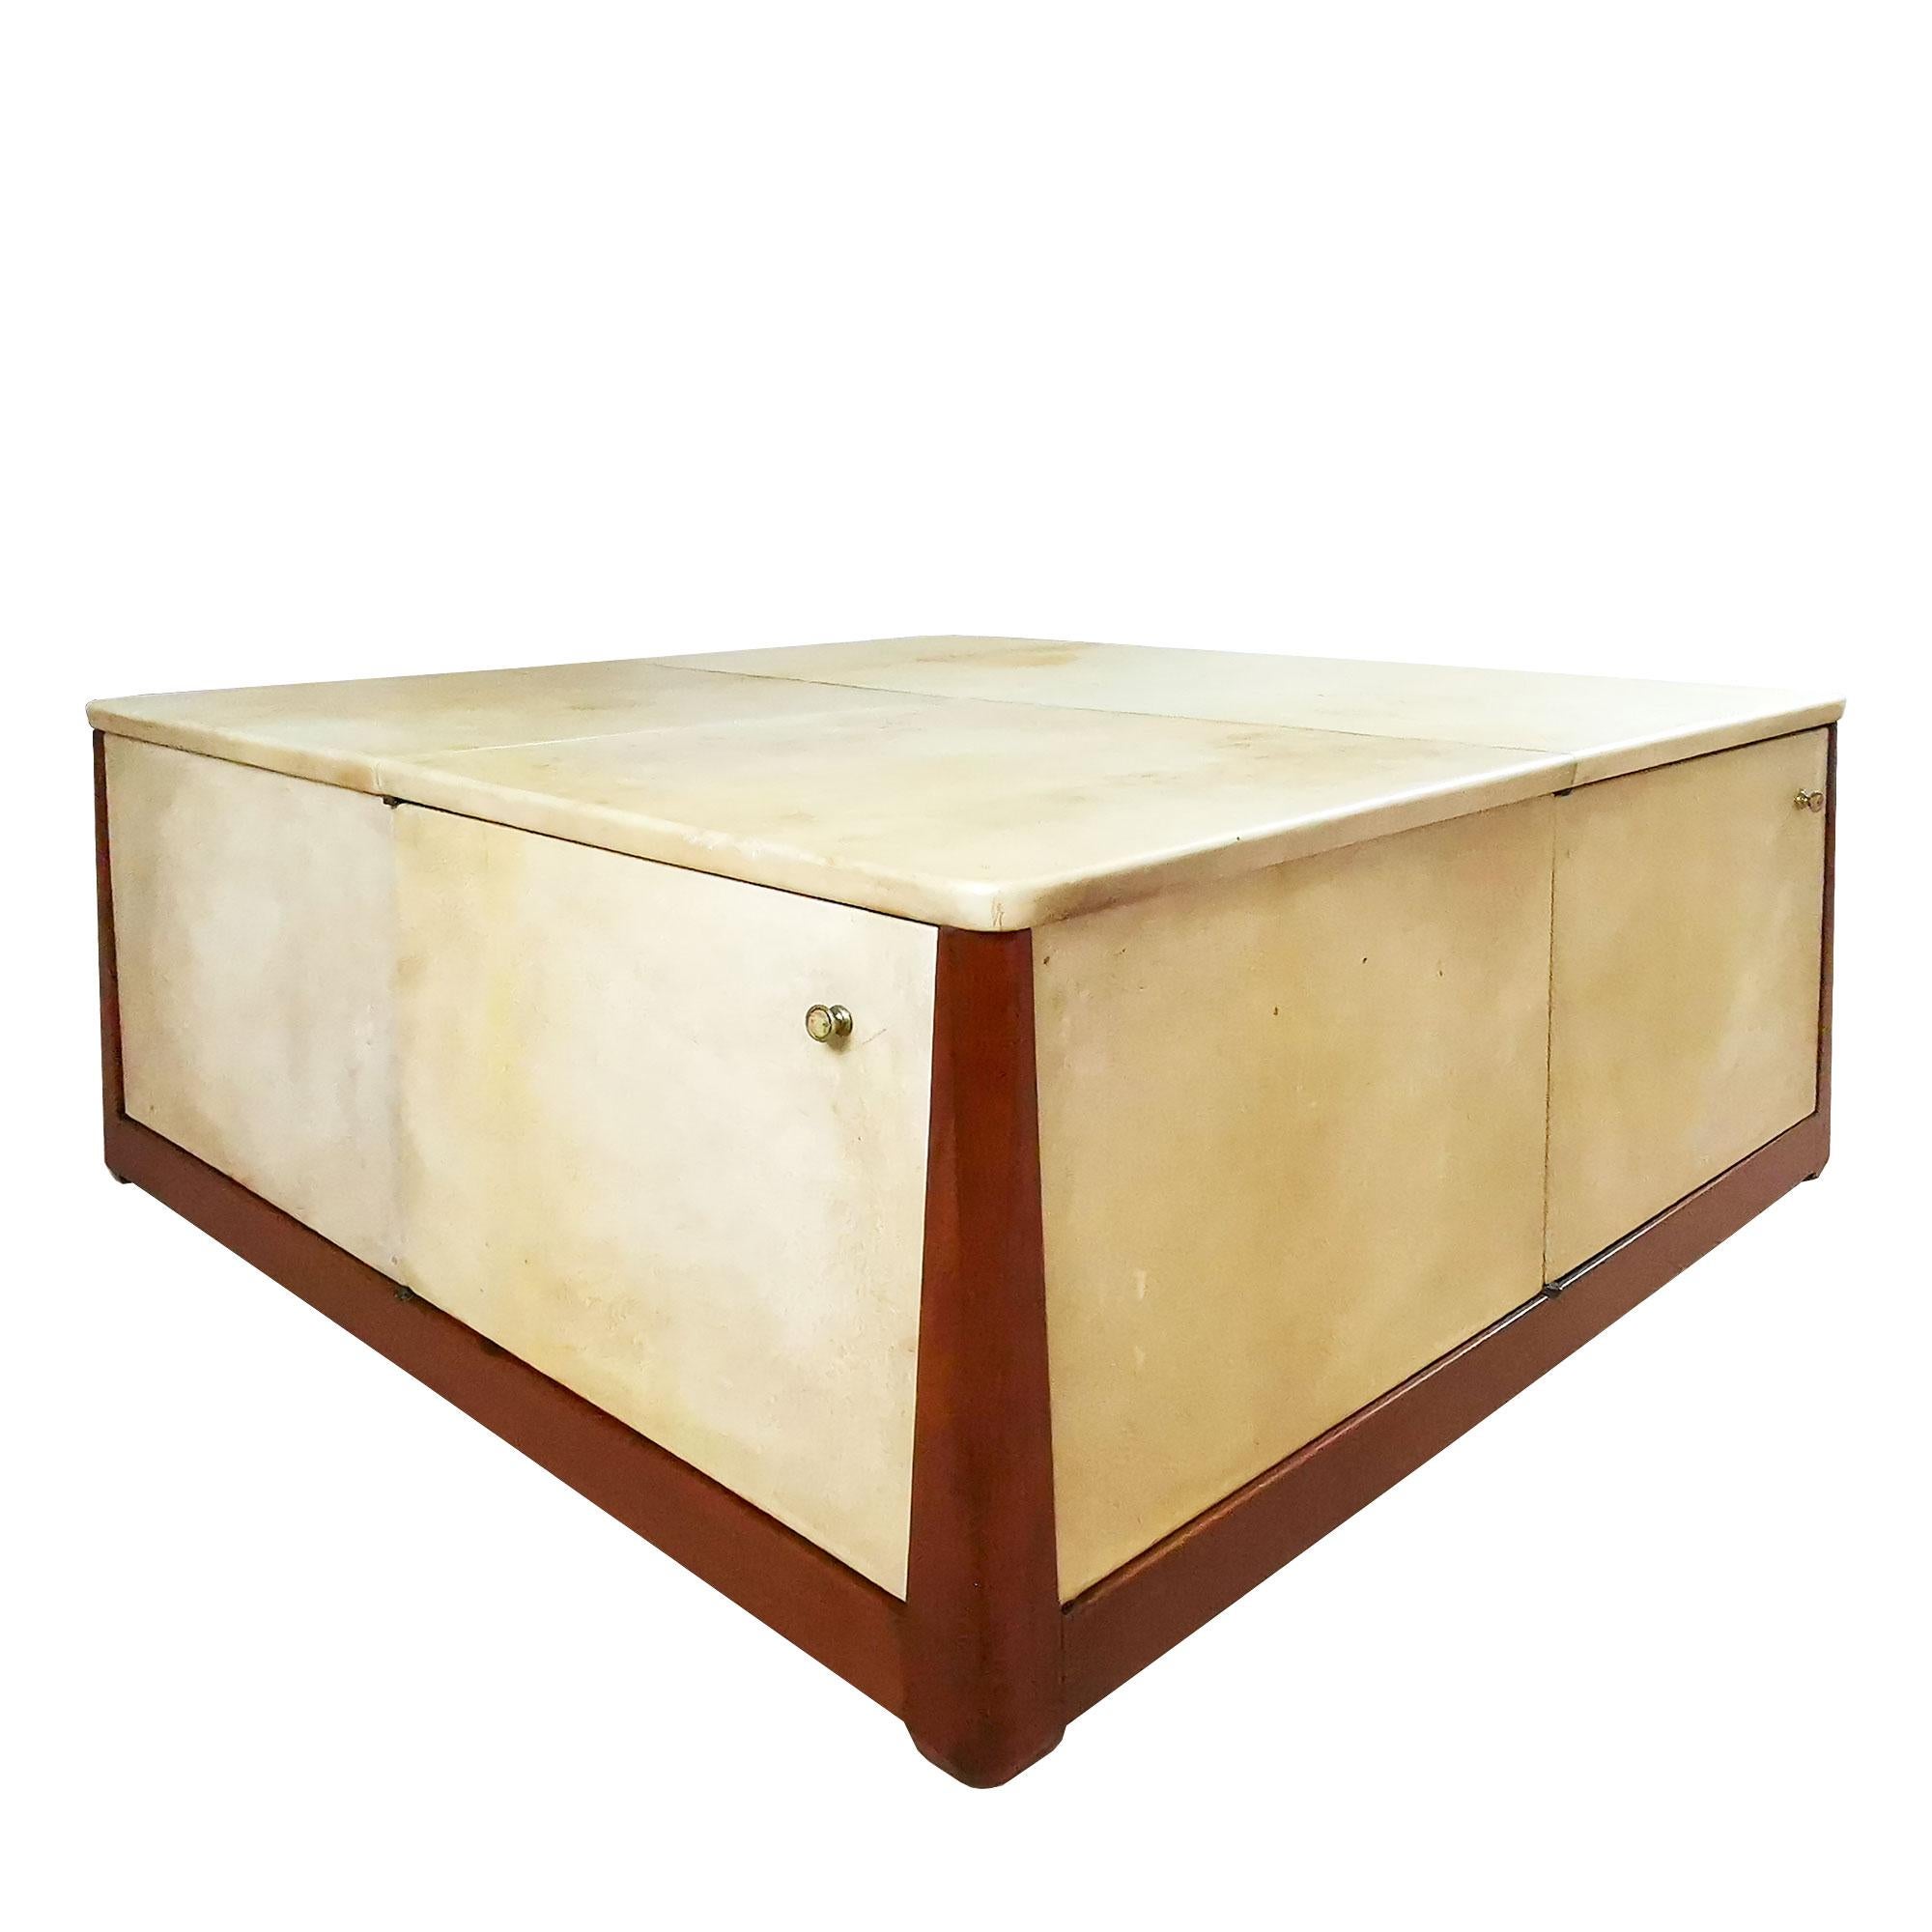 Large Square Mid-Century Modern Coffee Table by Pere Cosp, Mahogany - Barcelona In Good Condition For Sale In Girona, ES